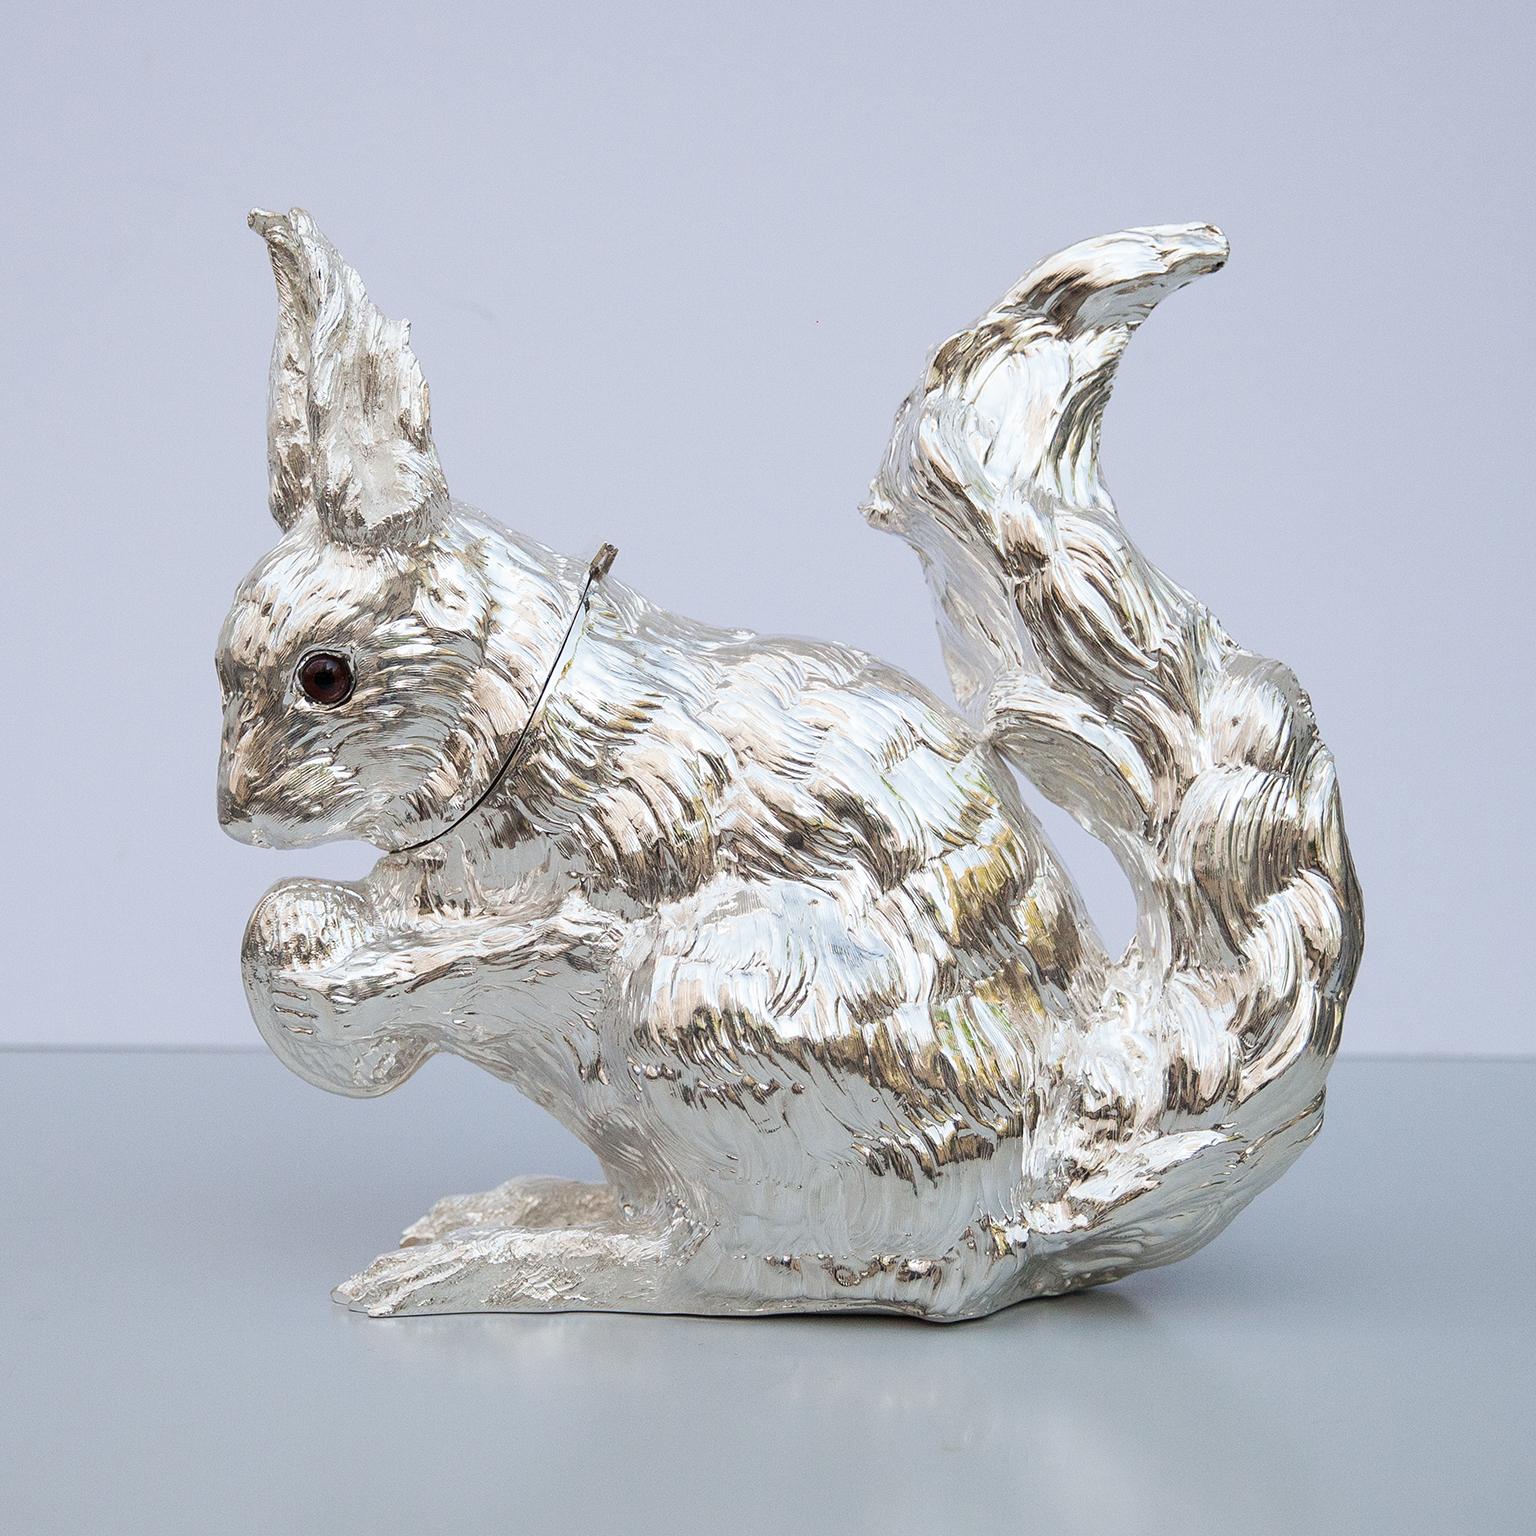 Franco Lapini exquisite vintage squirrel sculpture wine cooler is made entirely of metal plated in silver and its surface is lightly textured to give it an organic feel, new plastic inlay inside. Either alone or combined with other pieces by the